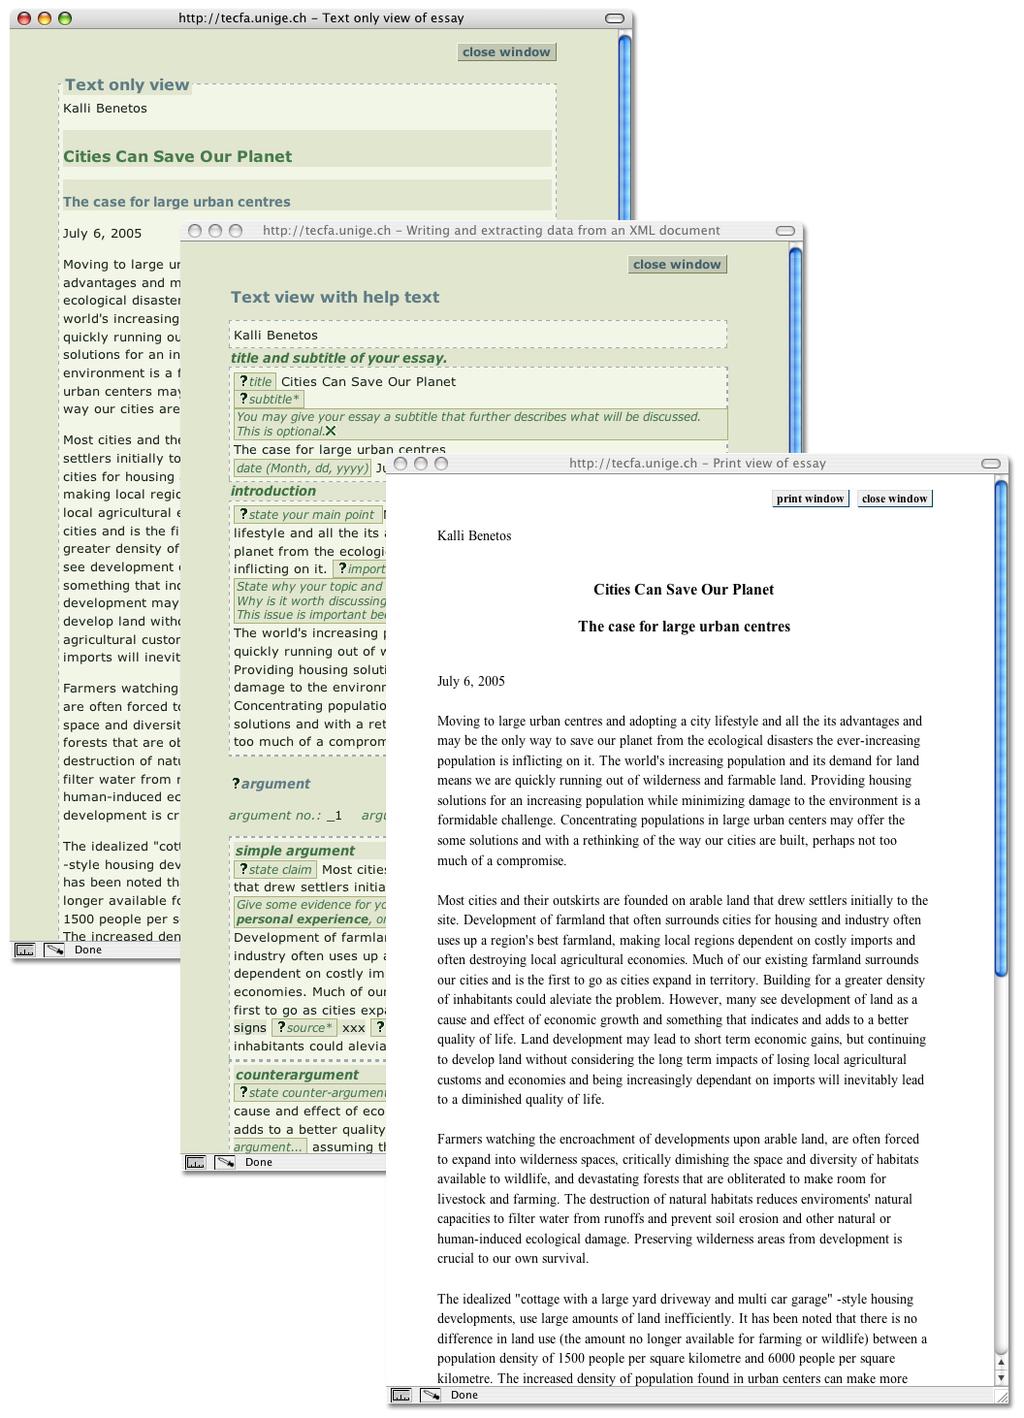 Fig. 12-7 Screen capture of view options left to